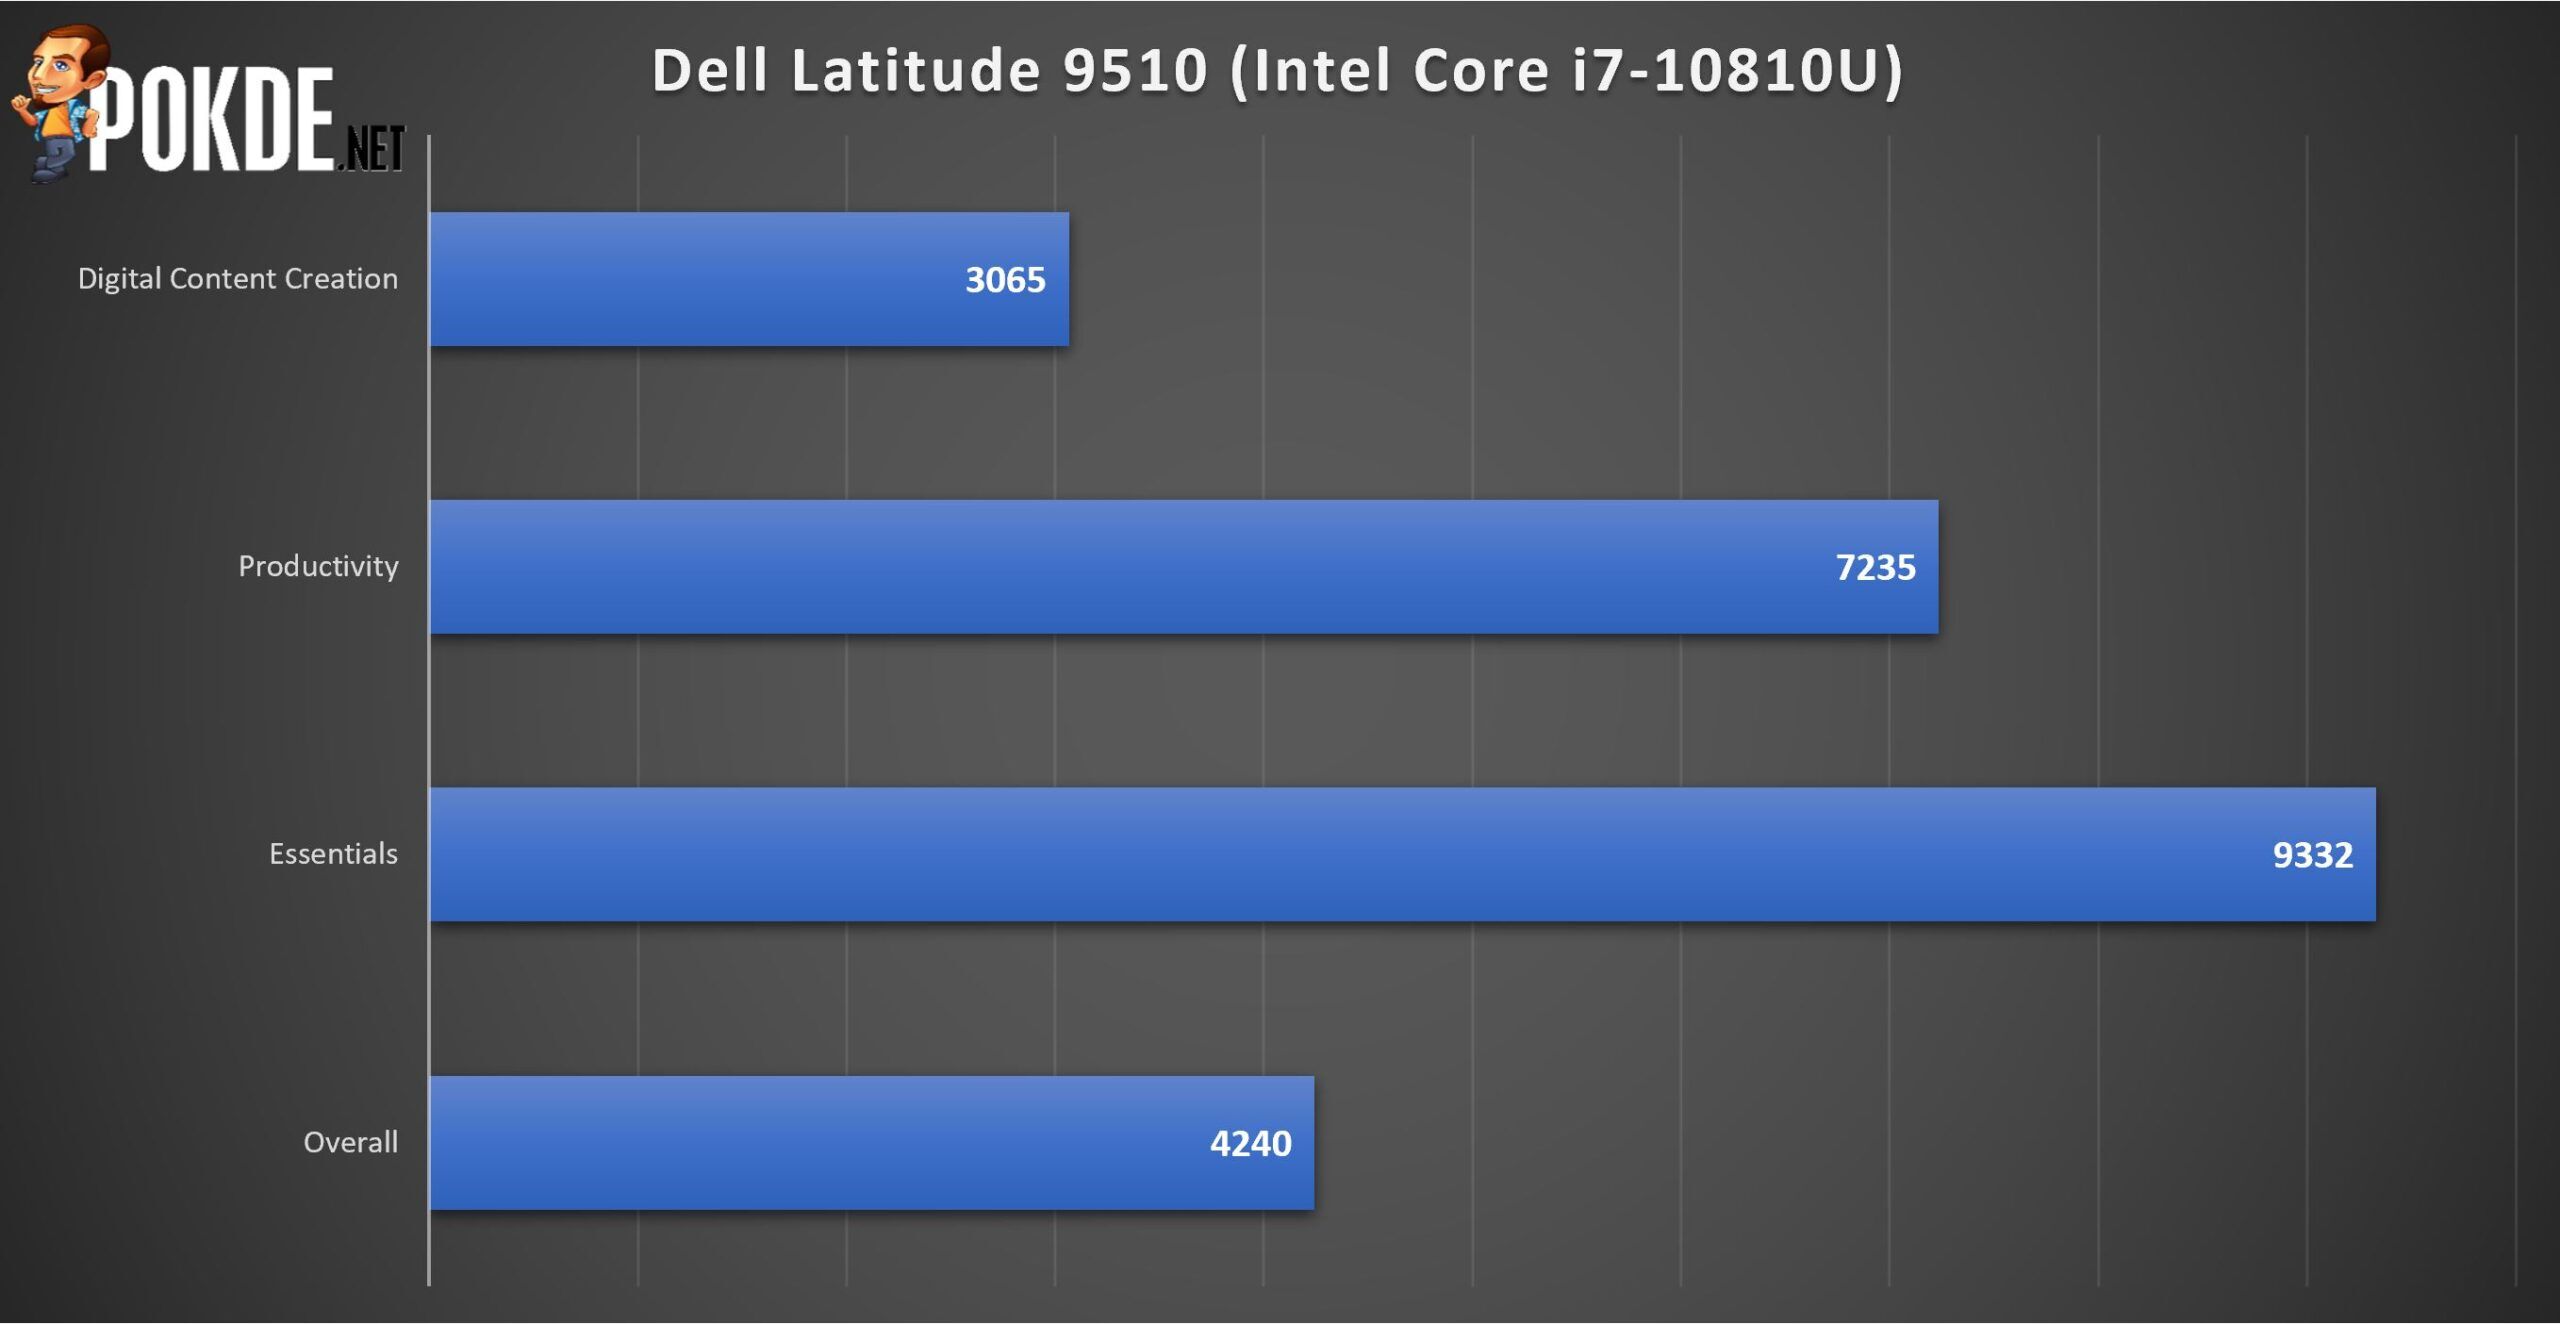 Dell Latitude 9510 2-in-1 Review - When Laptops Truly Mean Business 27